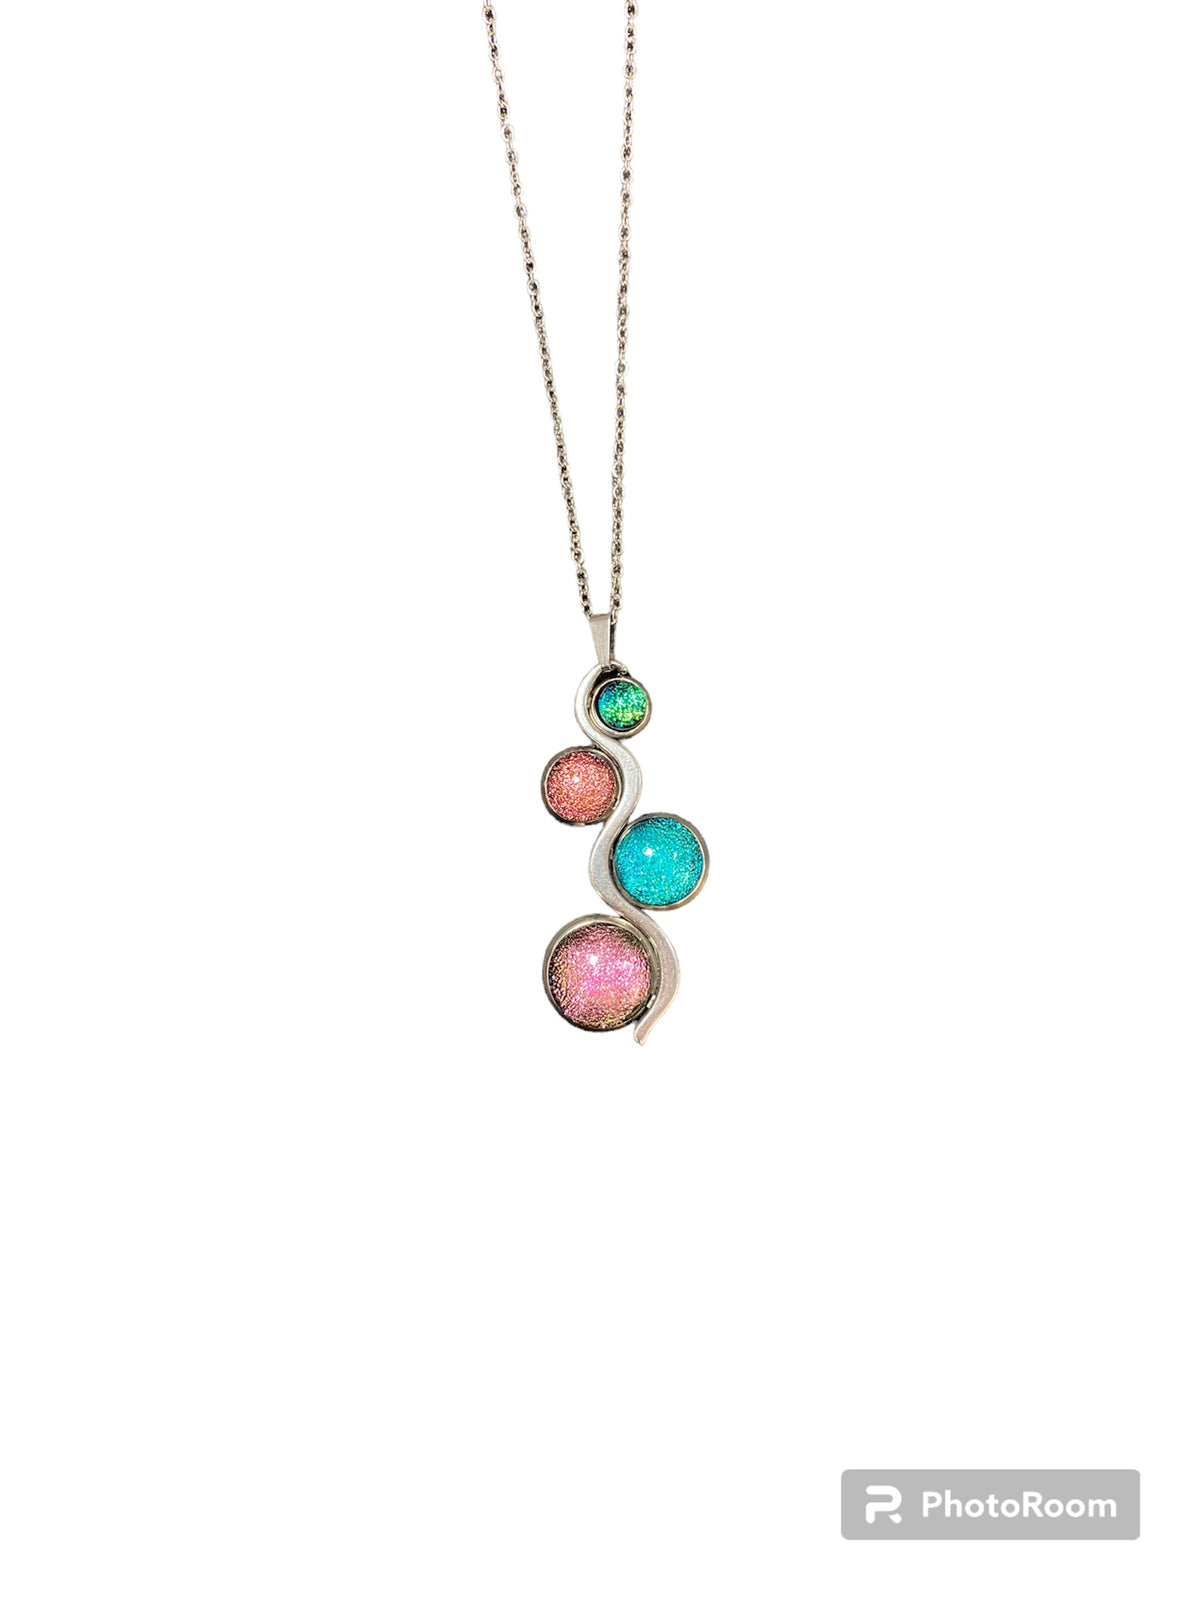 NECKLACE MICROCOSMOSES STAINLESS STEEL 4 PEARLS | 15 COLORS